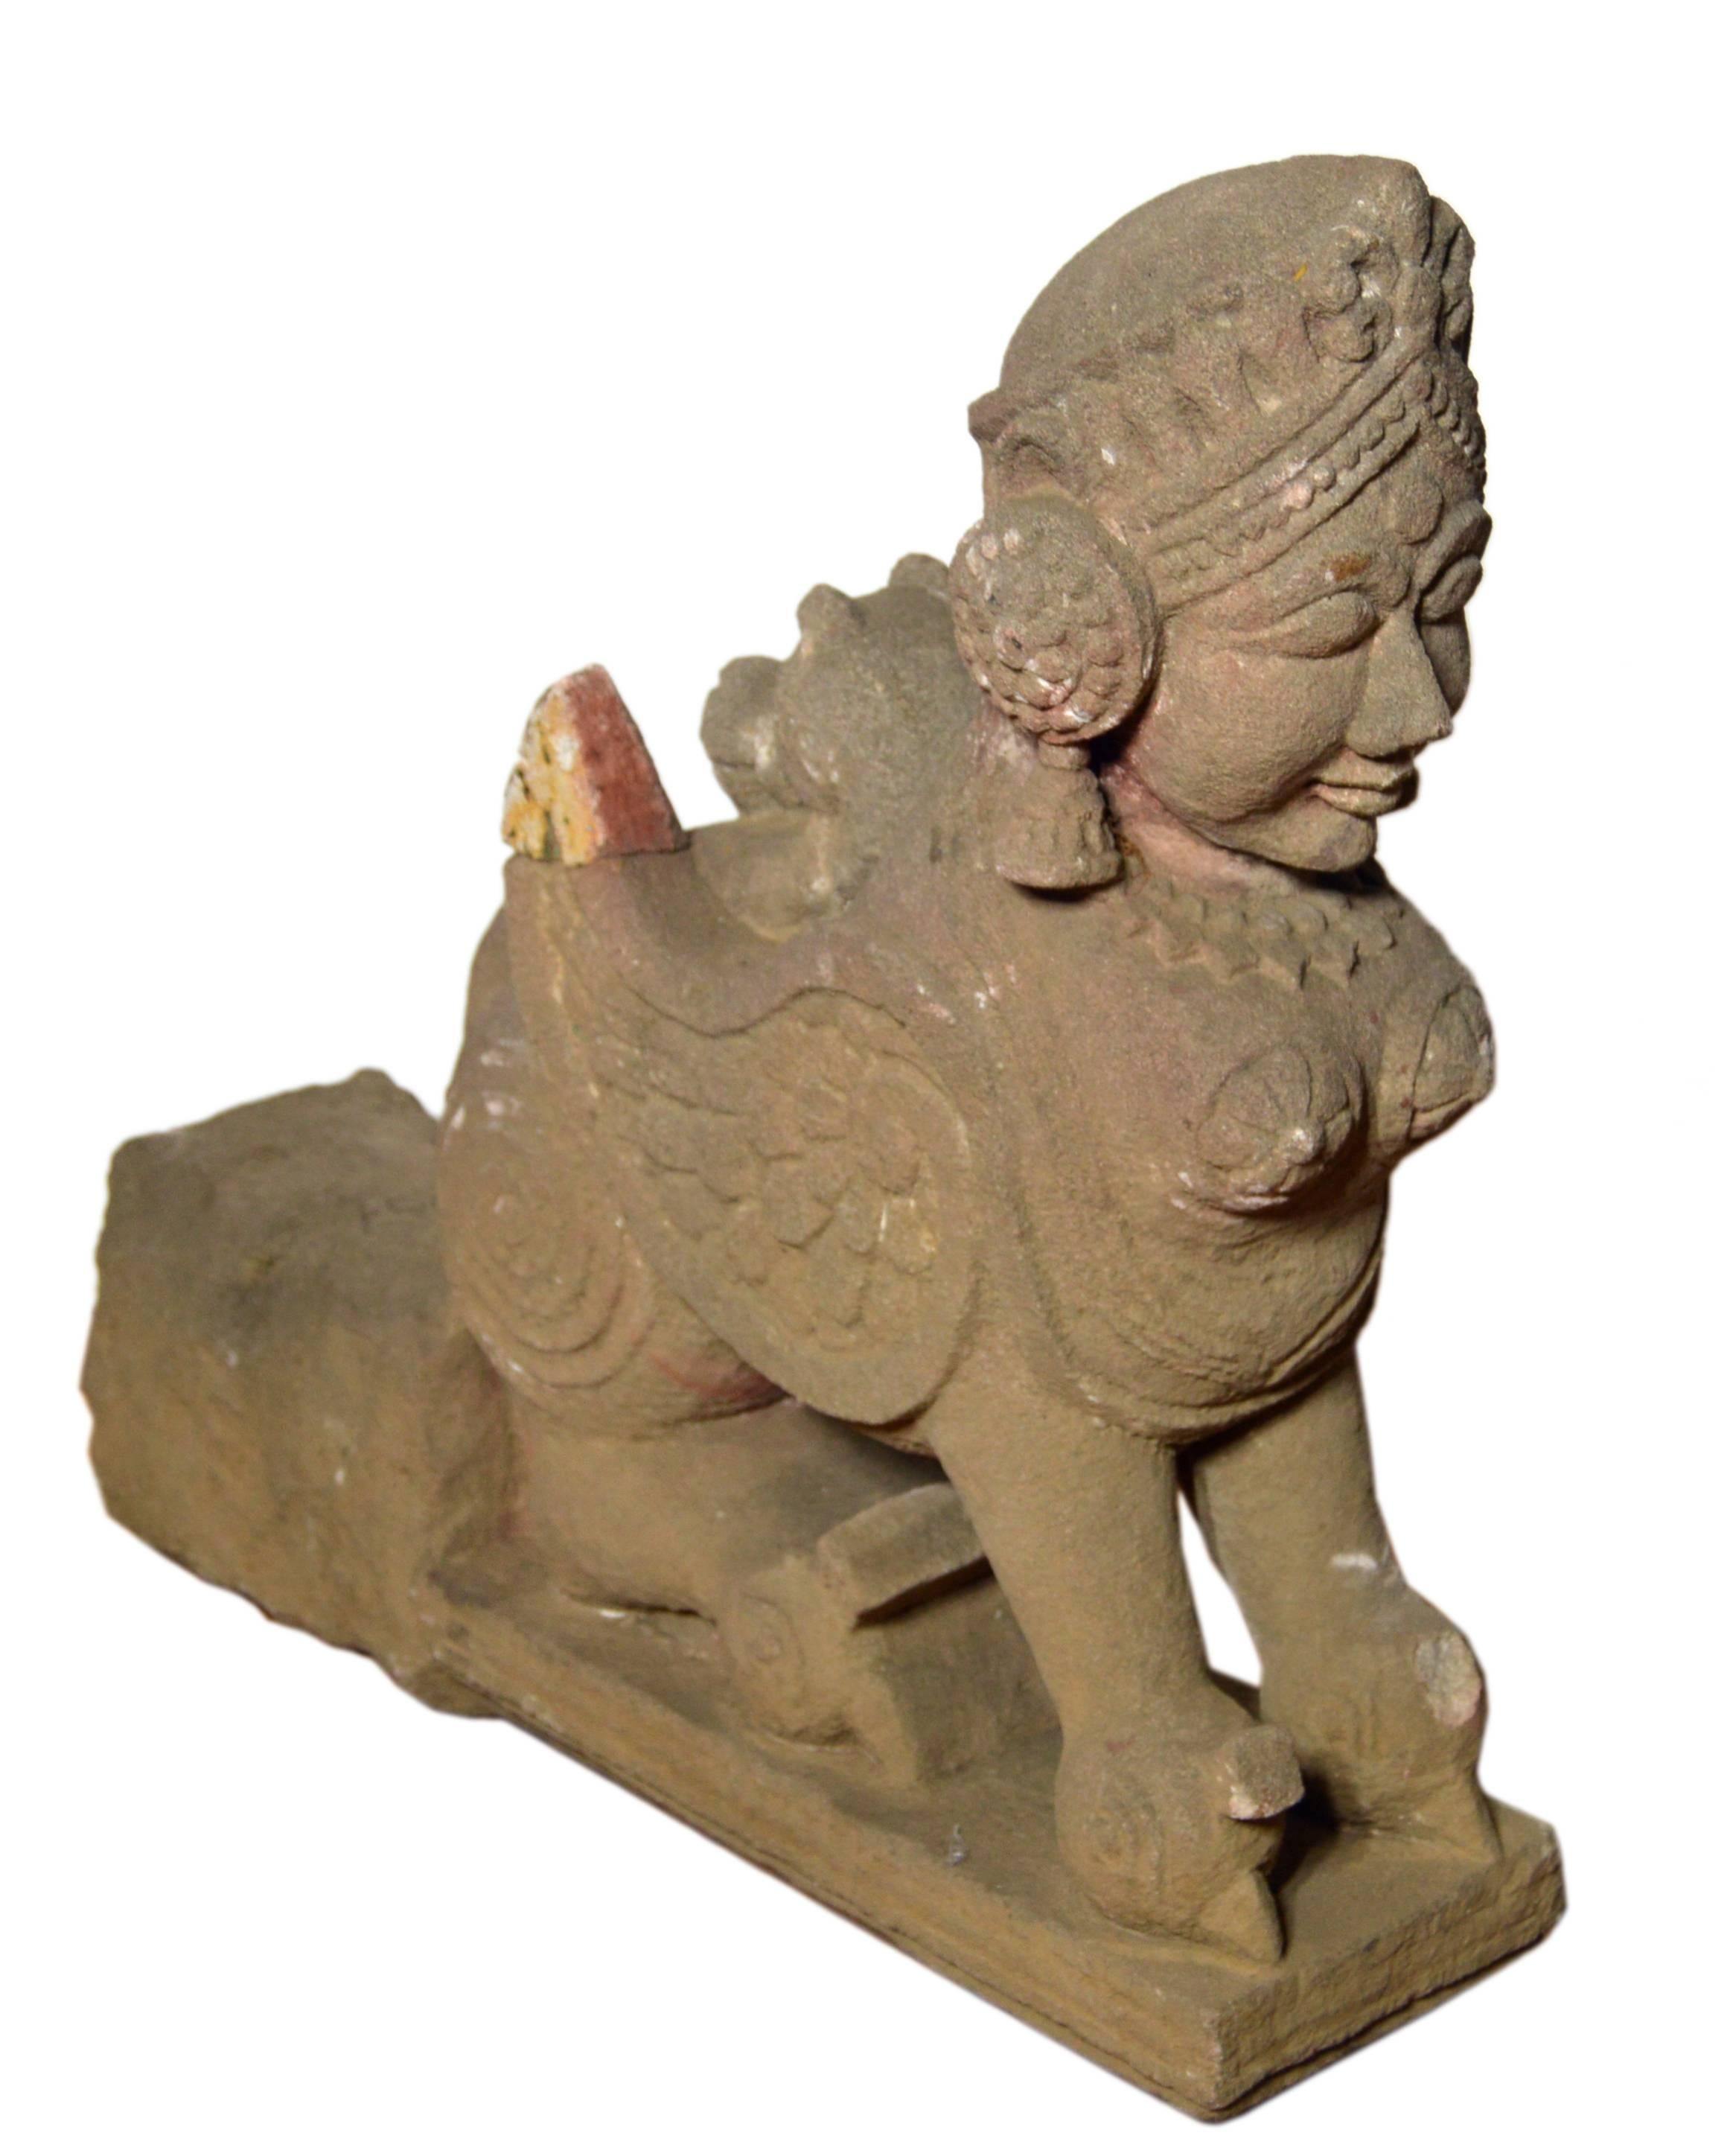 A 19th century Indian sphinx hand-carved stone sculpture, probably intended to adorn and protect a temple. The Indian stone sculpture features a sphinx figure, showcasing a winged lion body and a woman’s bust and head. This figure is decorated with